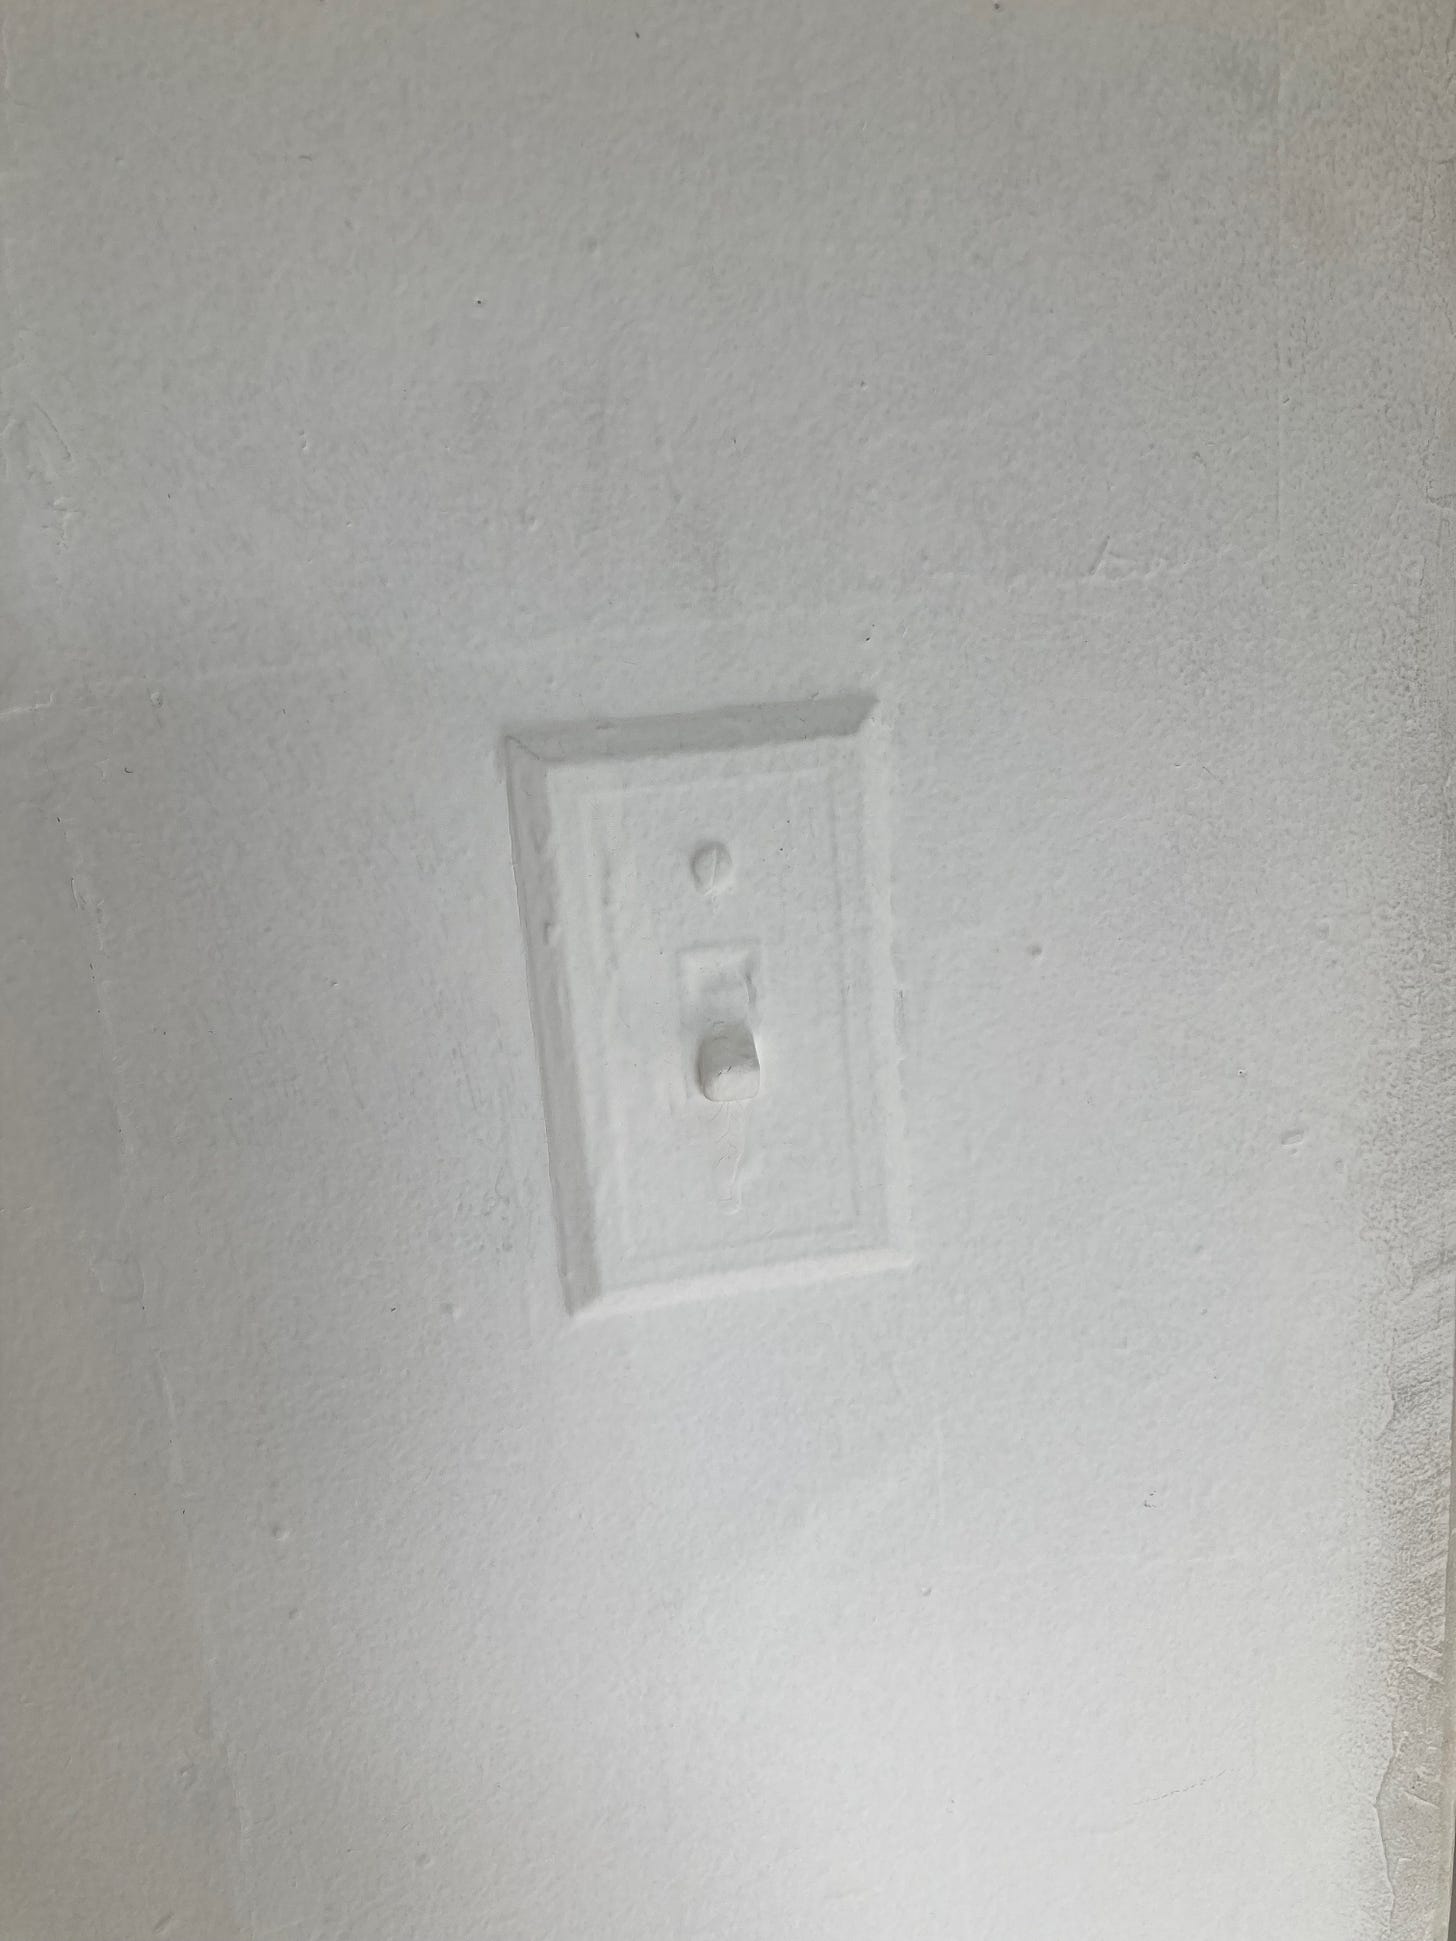 A lightswitch painted over - white walls, white paint covering all of it